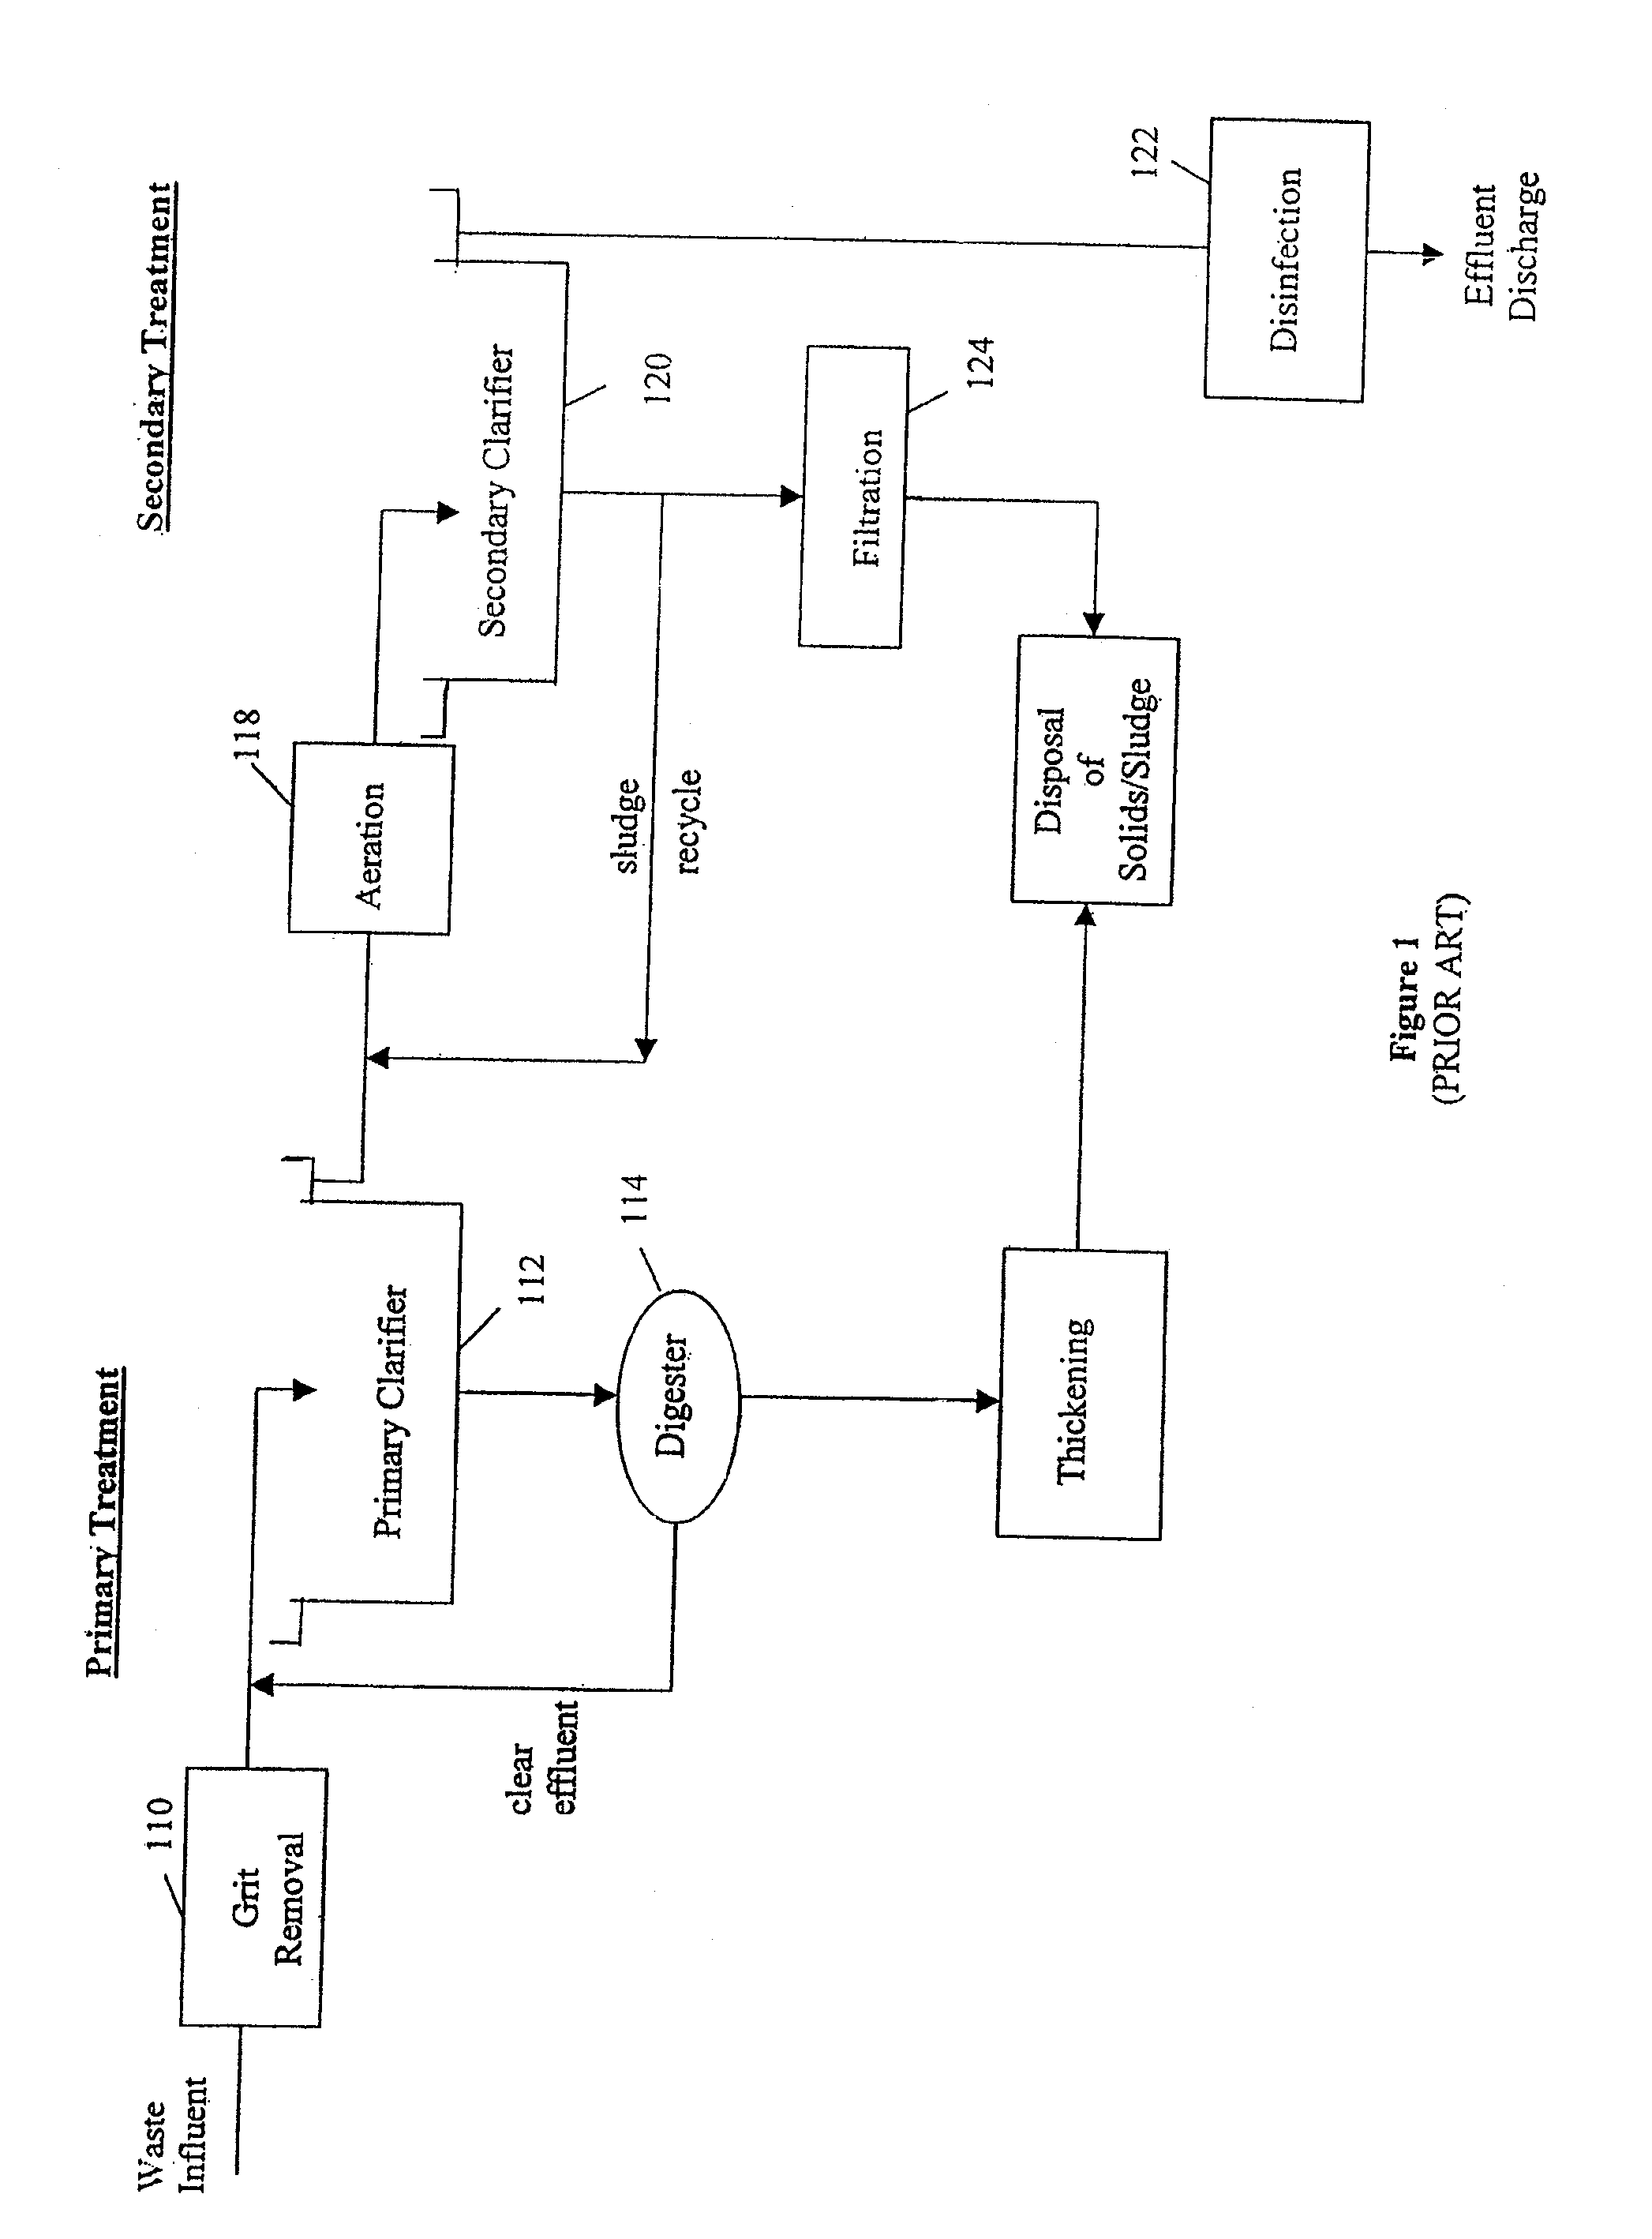 Apparatus and methods for control of waste treatment processes